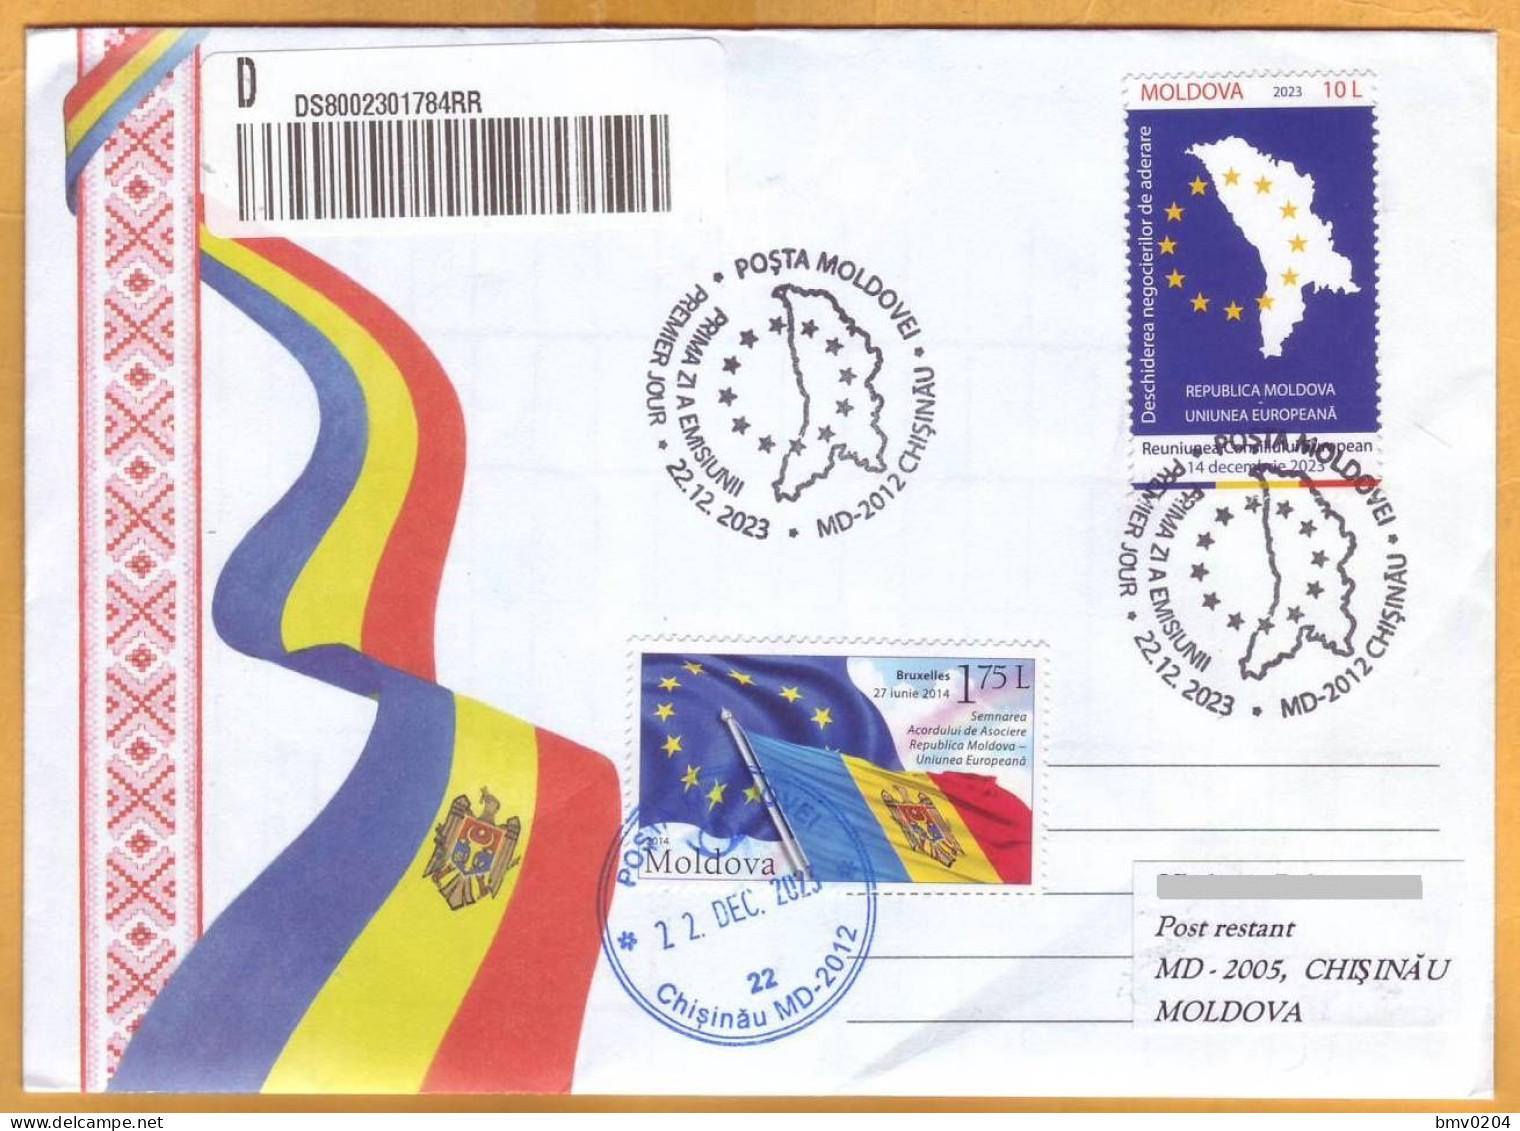 2023  Moldova FDC  Used The Opening Of Accession Negotiations REPUBLIC OF MOLDOVA - EUROPEAN UNION - Europese Gedachte